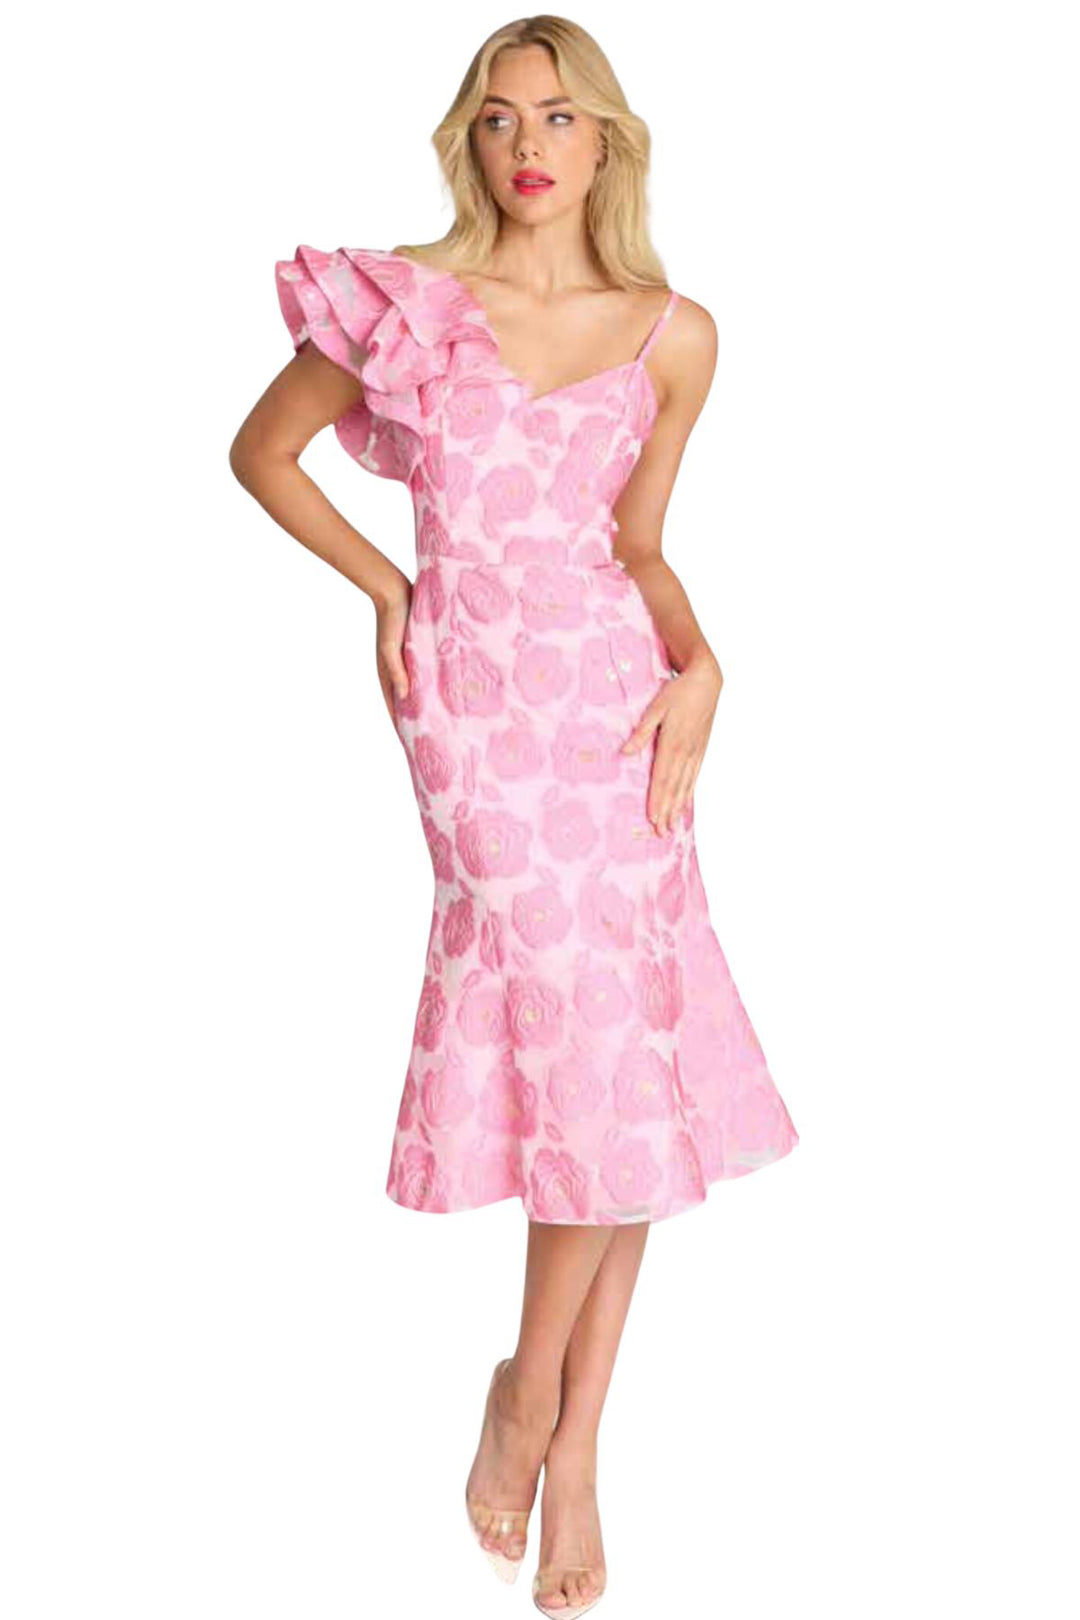 Front View of a lady wearing a one shoulder pink dress with flower detailing from Romance, midi length and one layered sleeve from Pizazz Boutique Nelson Bay ladies clothing